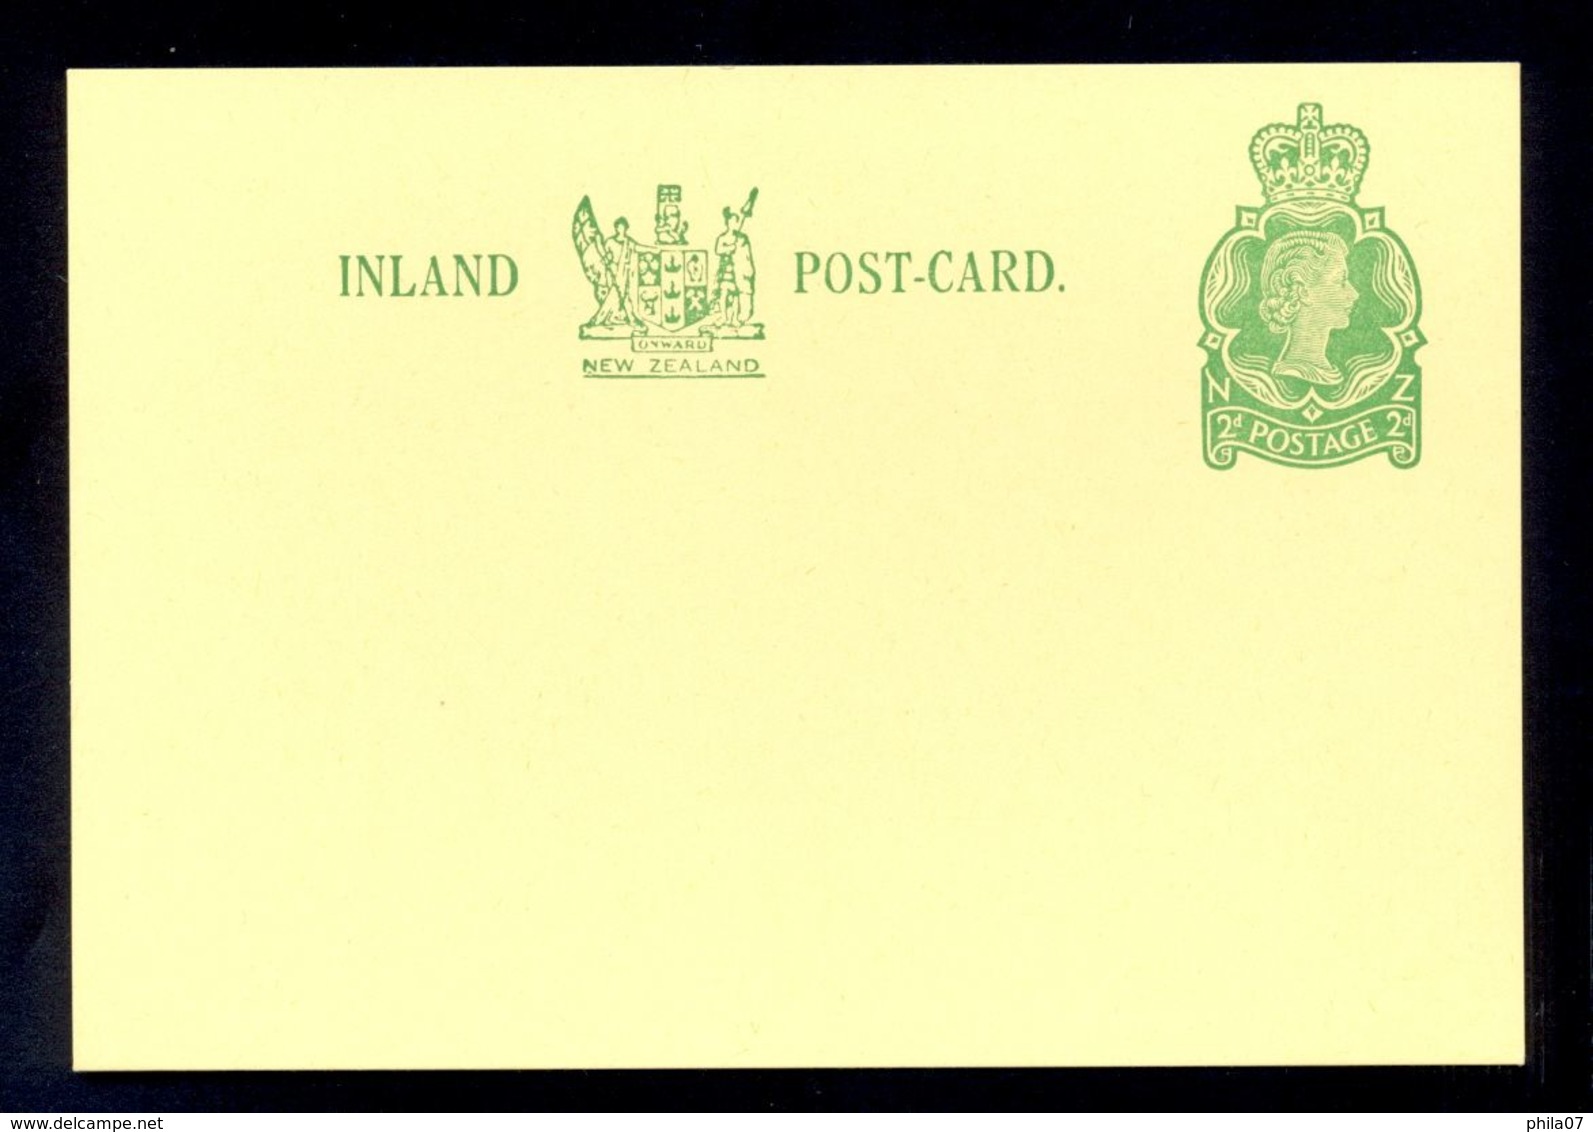 NEW ZEALAND - INLAND - Post-card With Imprinted Value, Not Traveled In Good Condition. - Ganzsachen